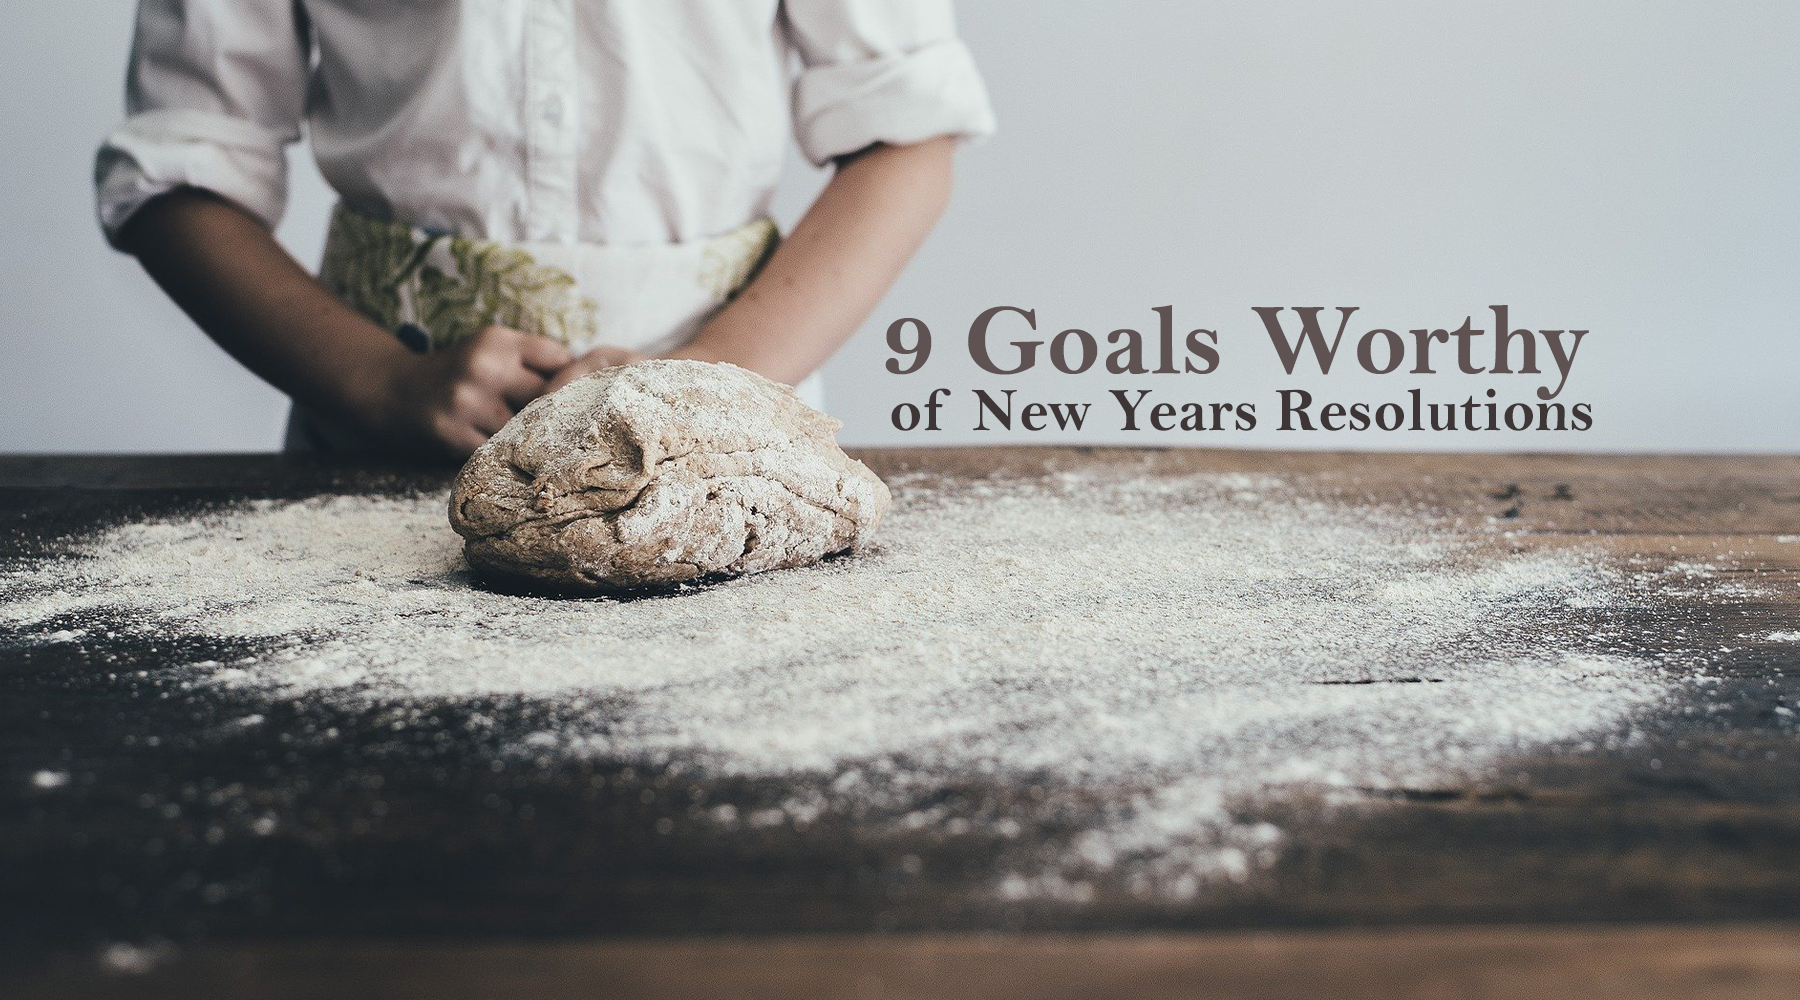 9 Goals Worthy of New Year's Resolutions